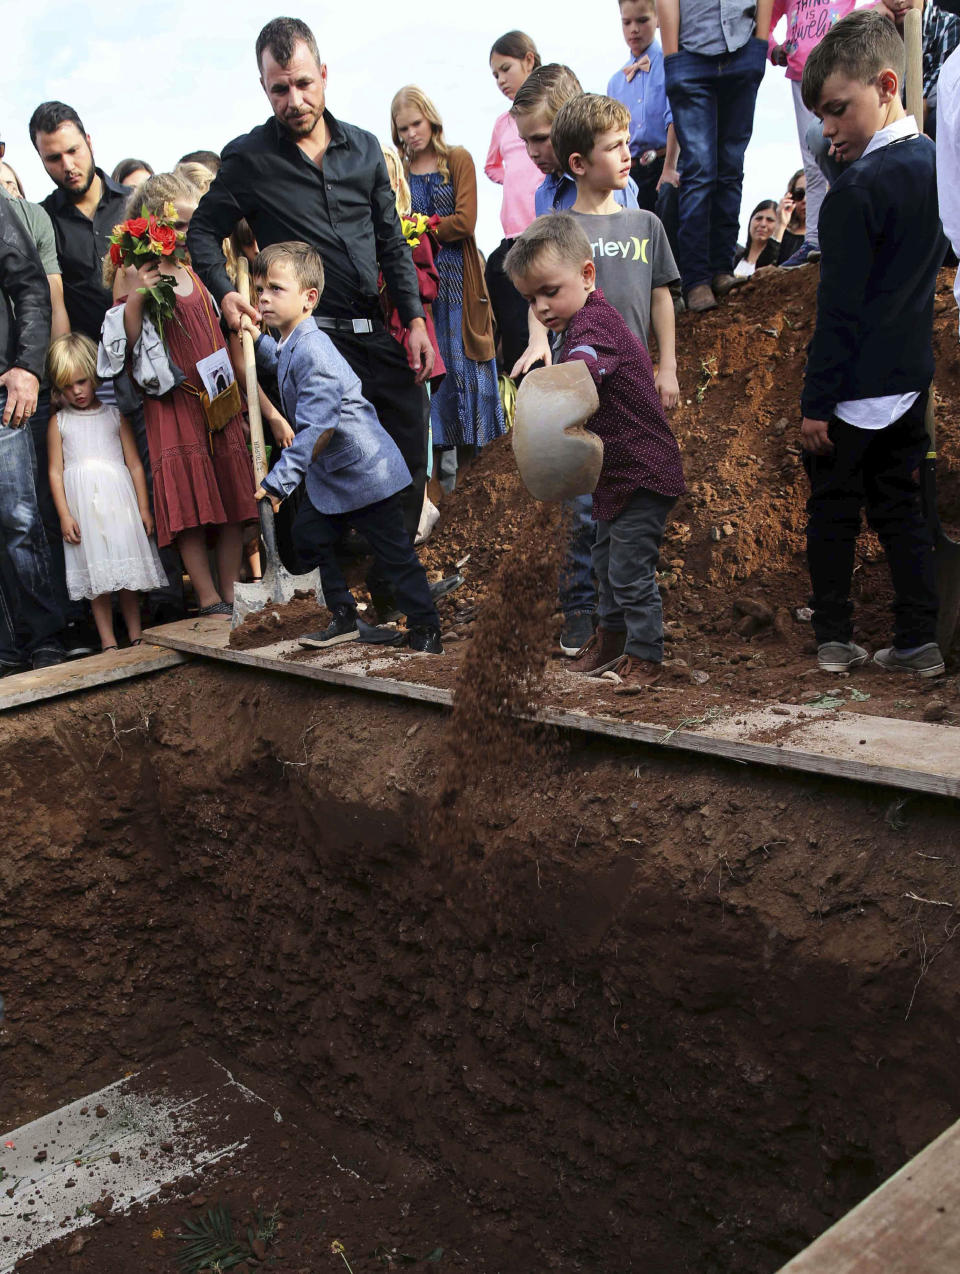 Children shovel dirt into the grave that contains the remains of Christina Langford Johnson the last victim of a cartel ambush that killed nine American women and children earlier this week, during a burial service in Colonia LeBaron, Mexico, Saturday, Nov. 9, 2019. In the attack Monday, Langford Johnson jumped out of her vehicle and waved her hands to show she was no threat to the attackers and was shot twice in the heart, community members say. Her daughter Faith Marie Johnson, 7 months old, was found unharmed in her car seat. (AP Photo/Marco Ugarte)